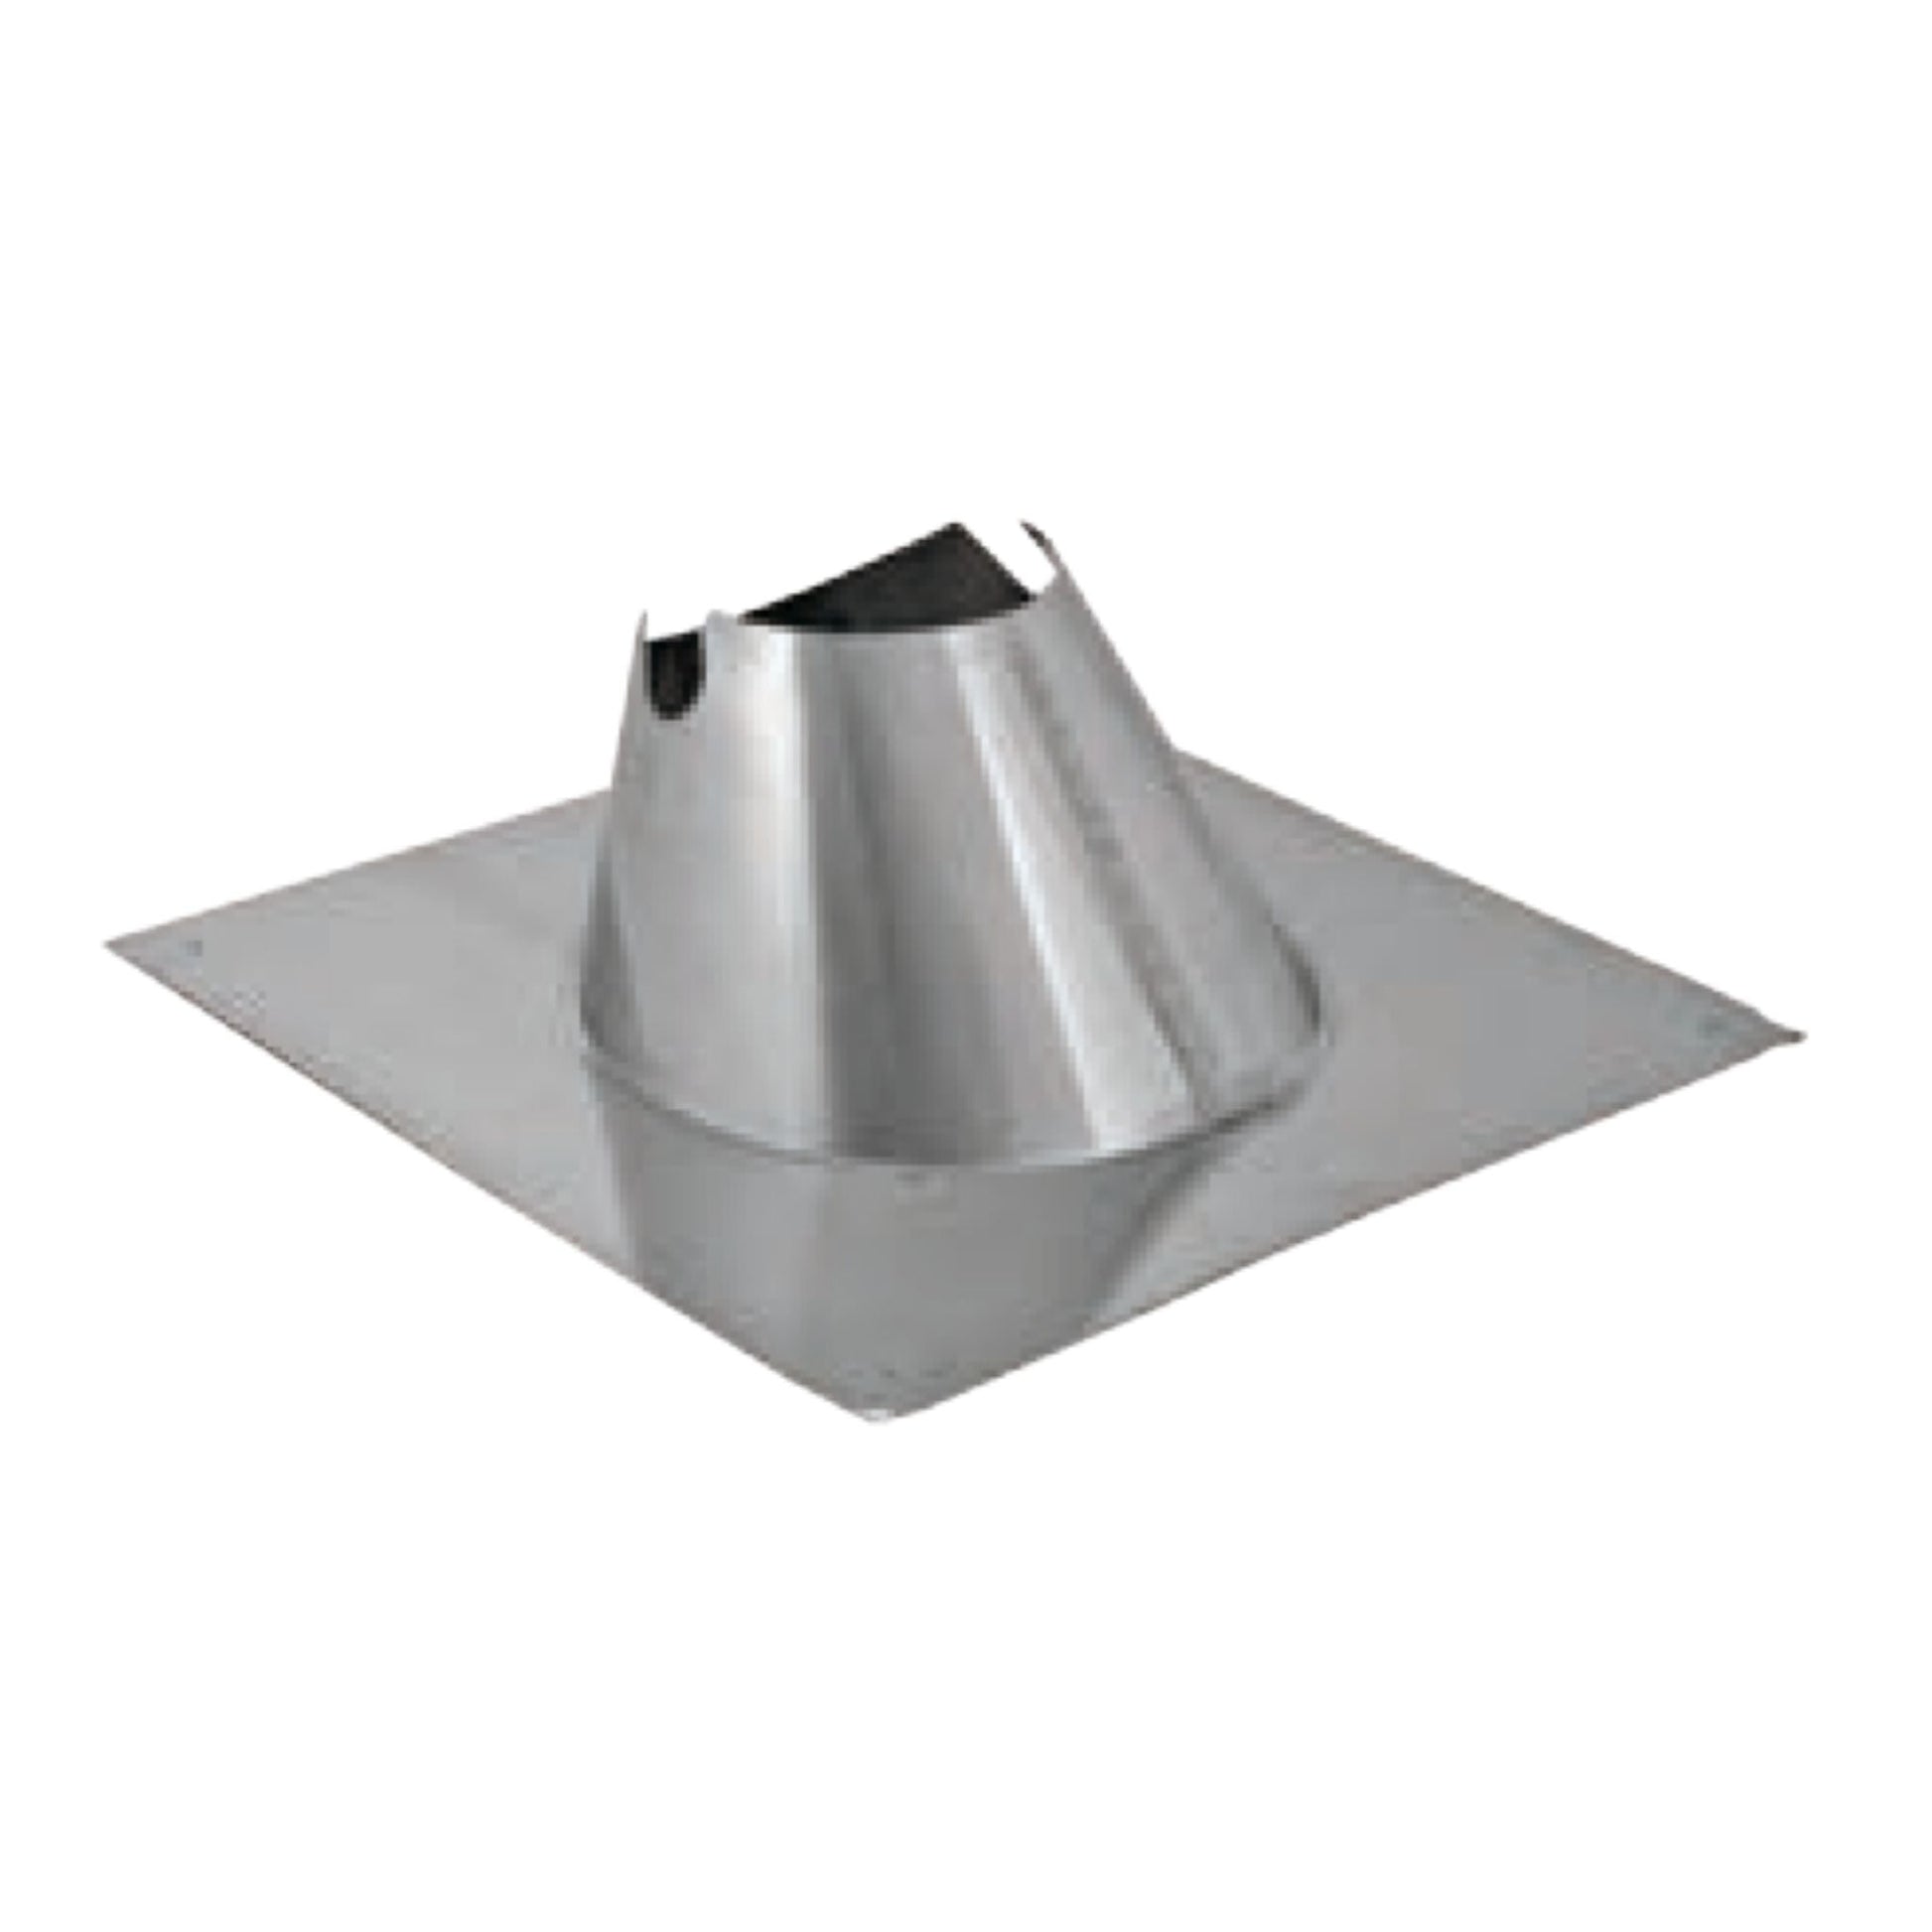 DuraVent FasNSeal 10" 29-4C Stainless Steel Variable Pitch Roof Flashing